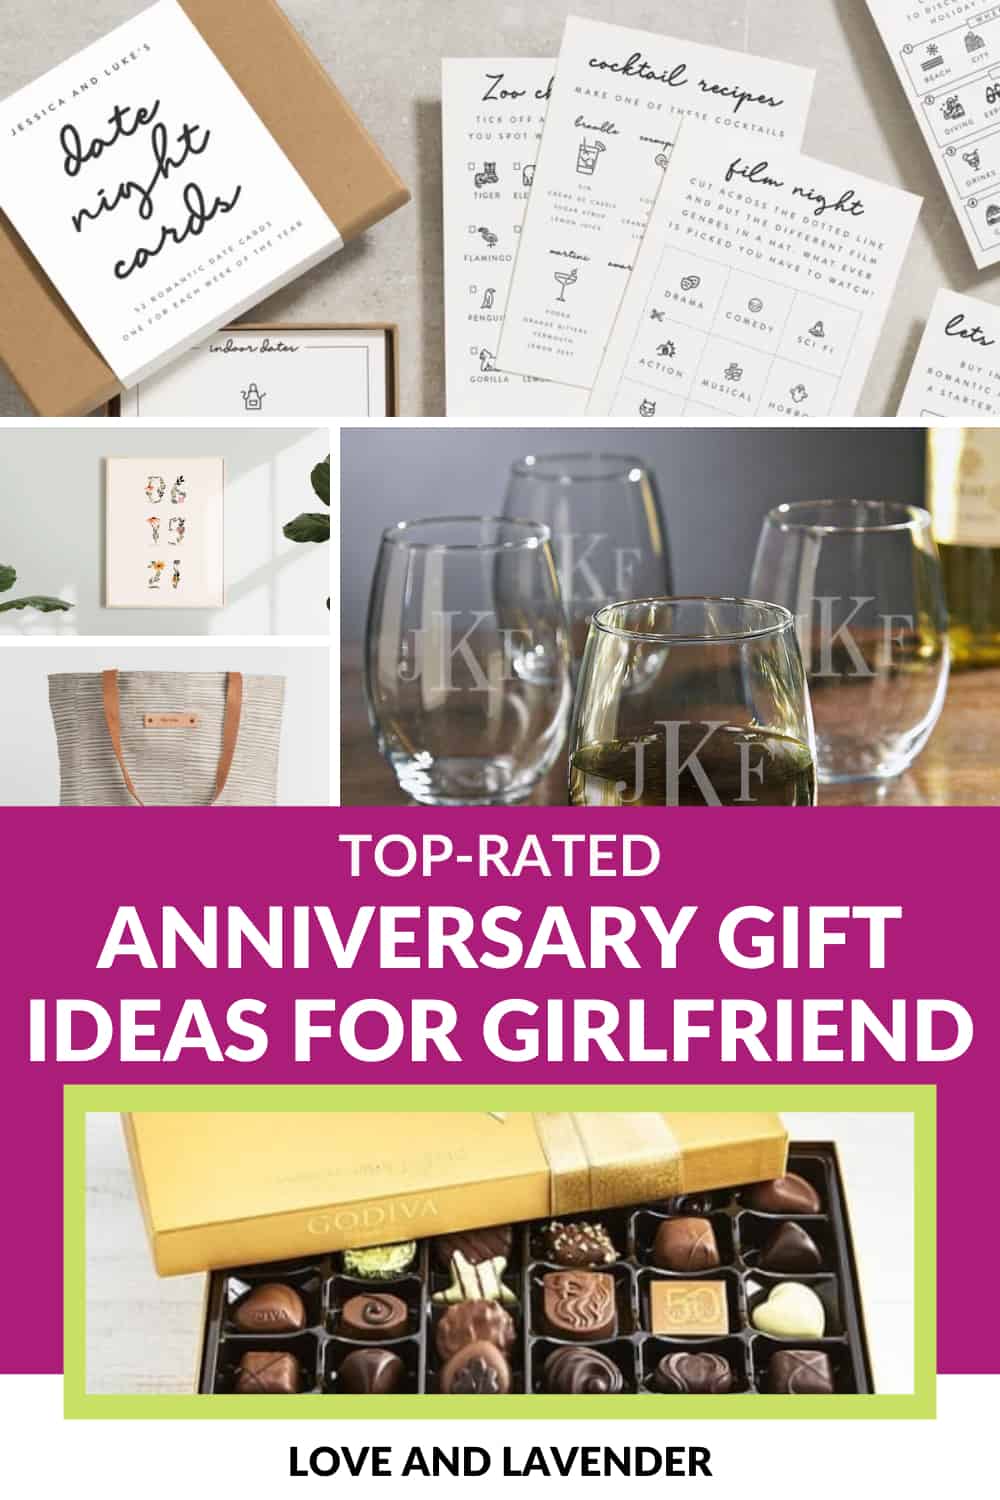 Pinterest pin - Unique Anniversary Gifts for Your Girlfriend